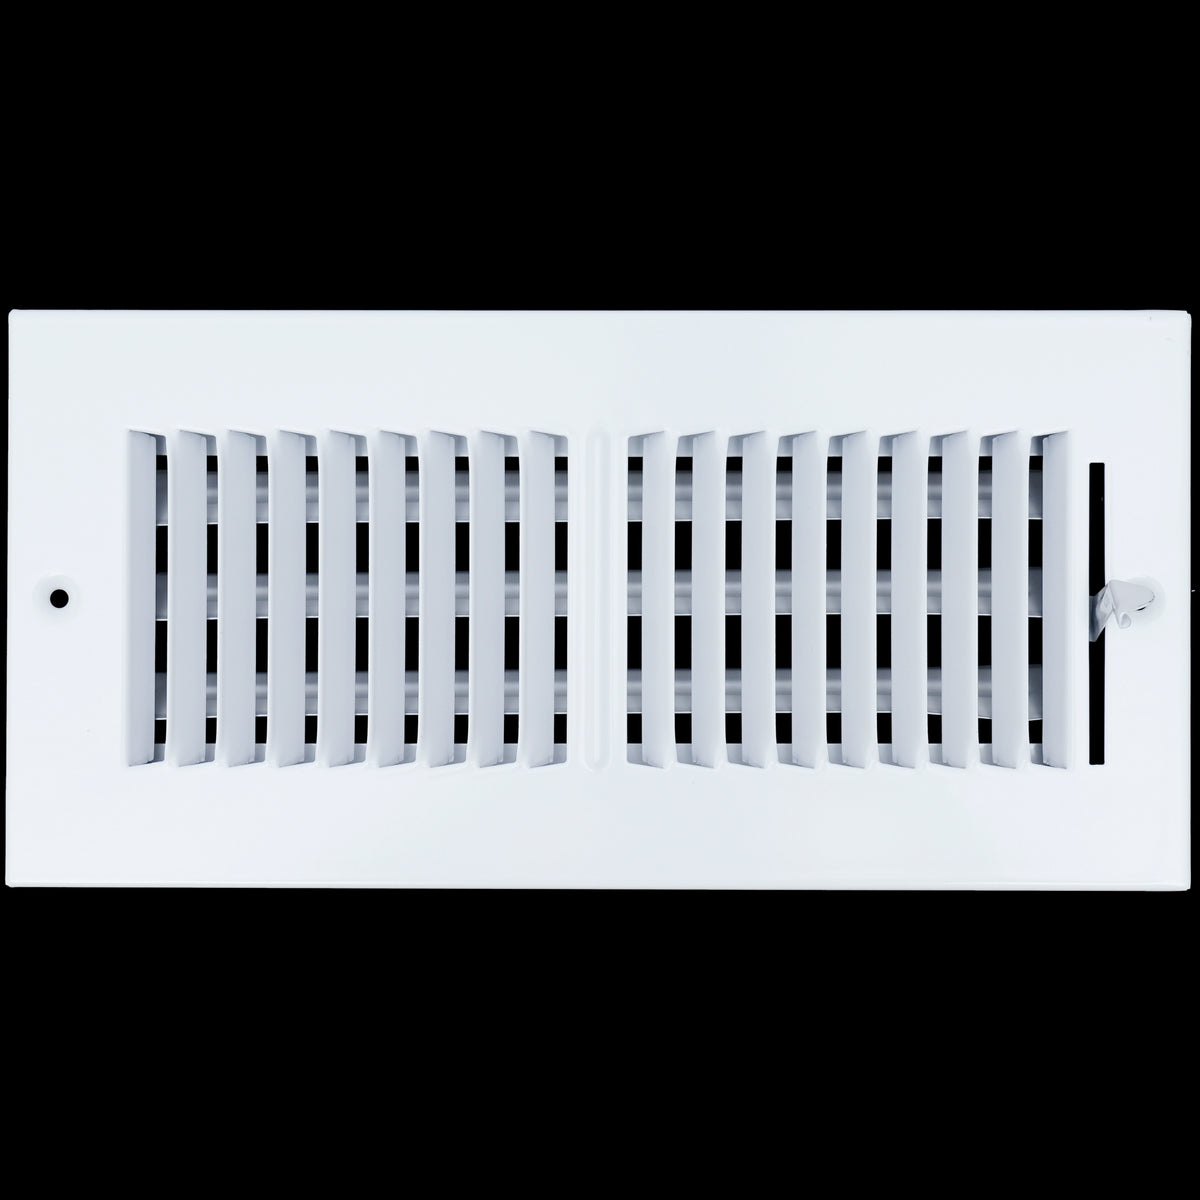 airgrilles 10 x 4 duct opening - 2 way steel air supply diffuser for sidewall and ceiling hnd-asg-wh-2way-10x4 764613097832 - 1